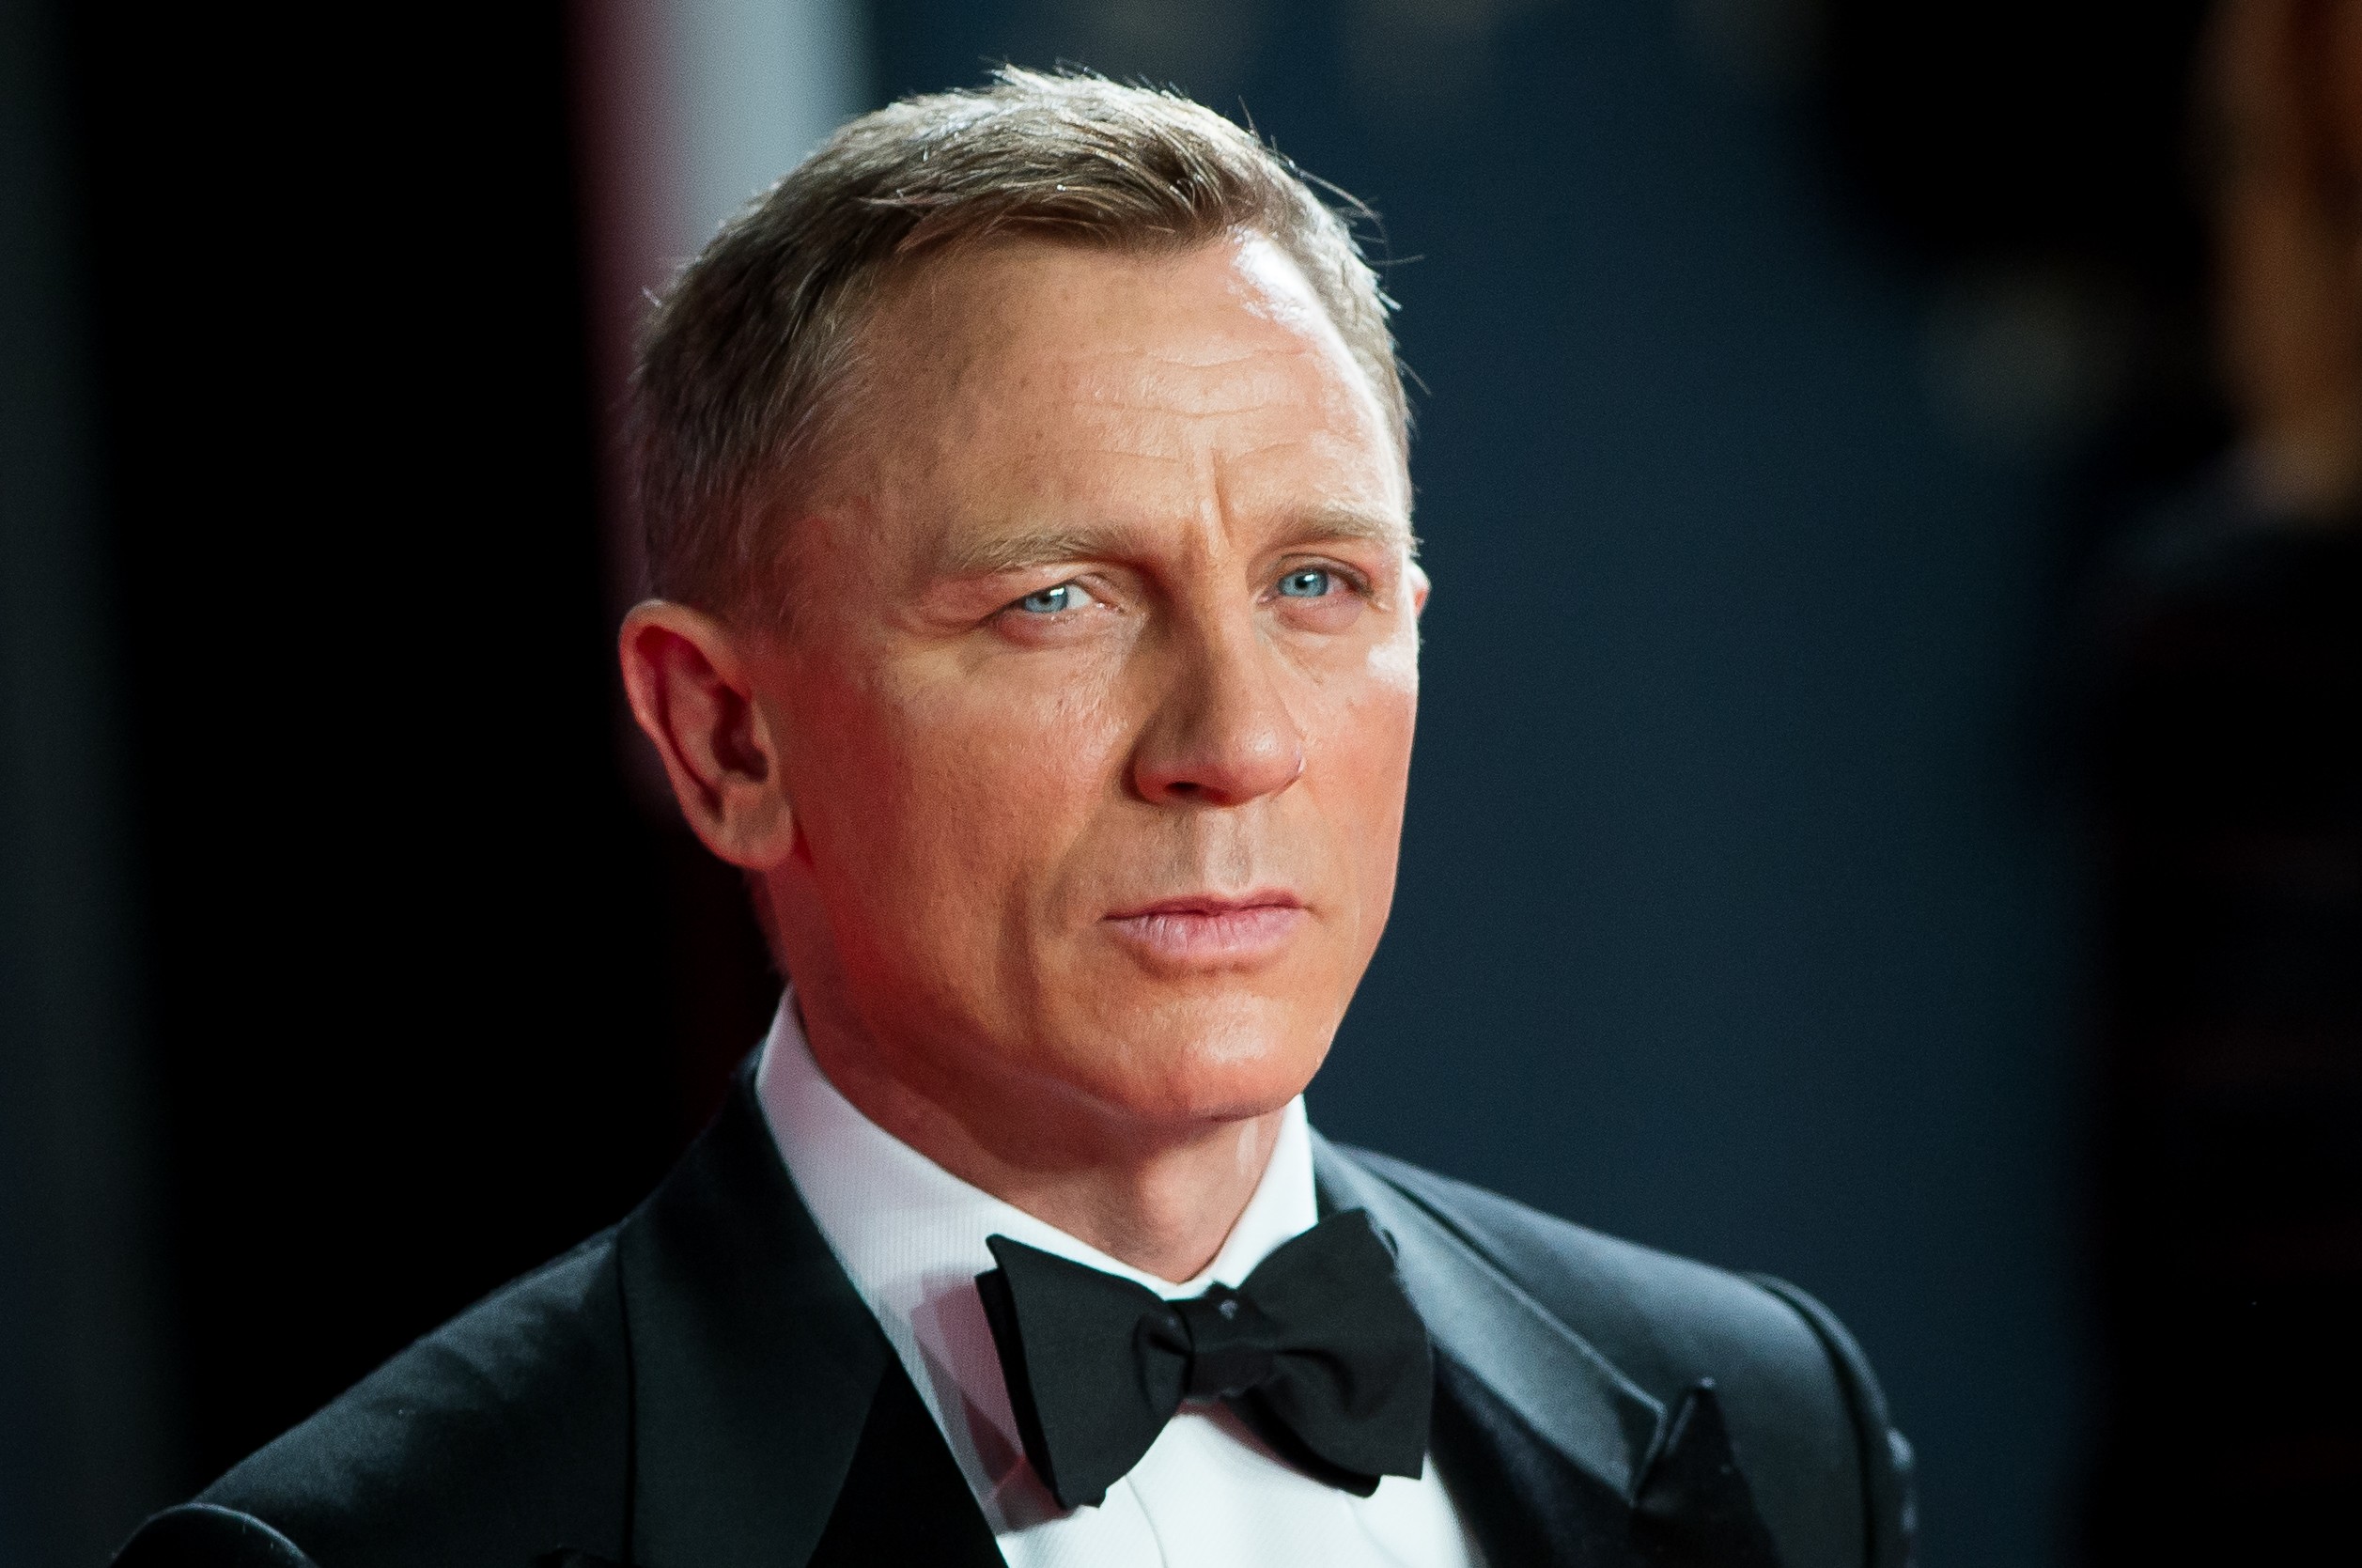 Daniel Craig admits shocking comments about filming another Bond appeared ‘ungrateful’